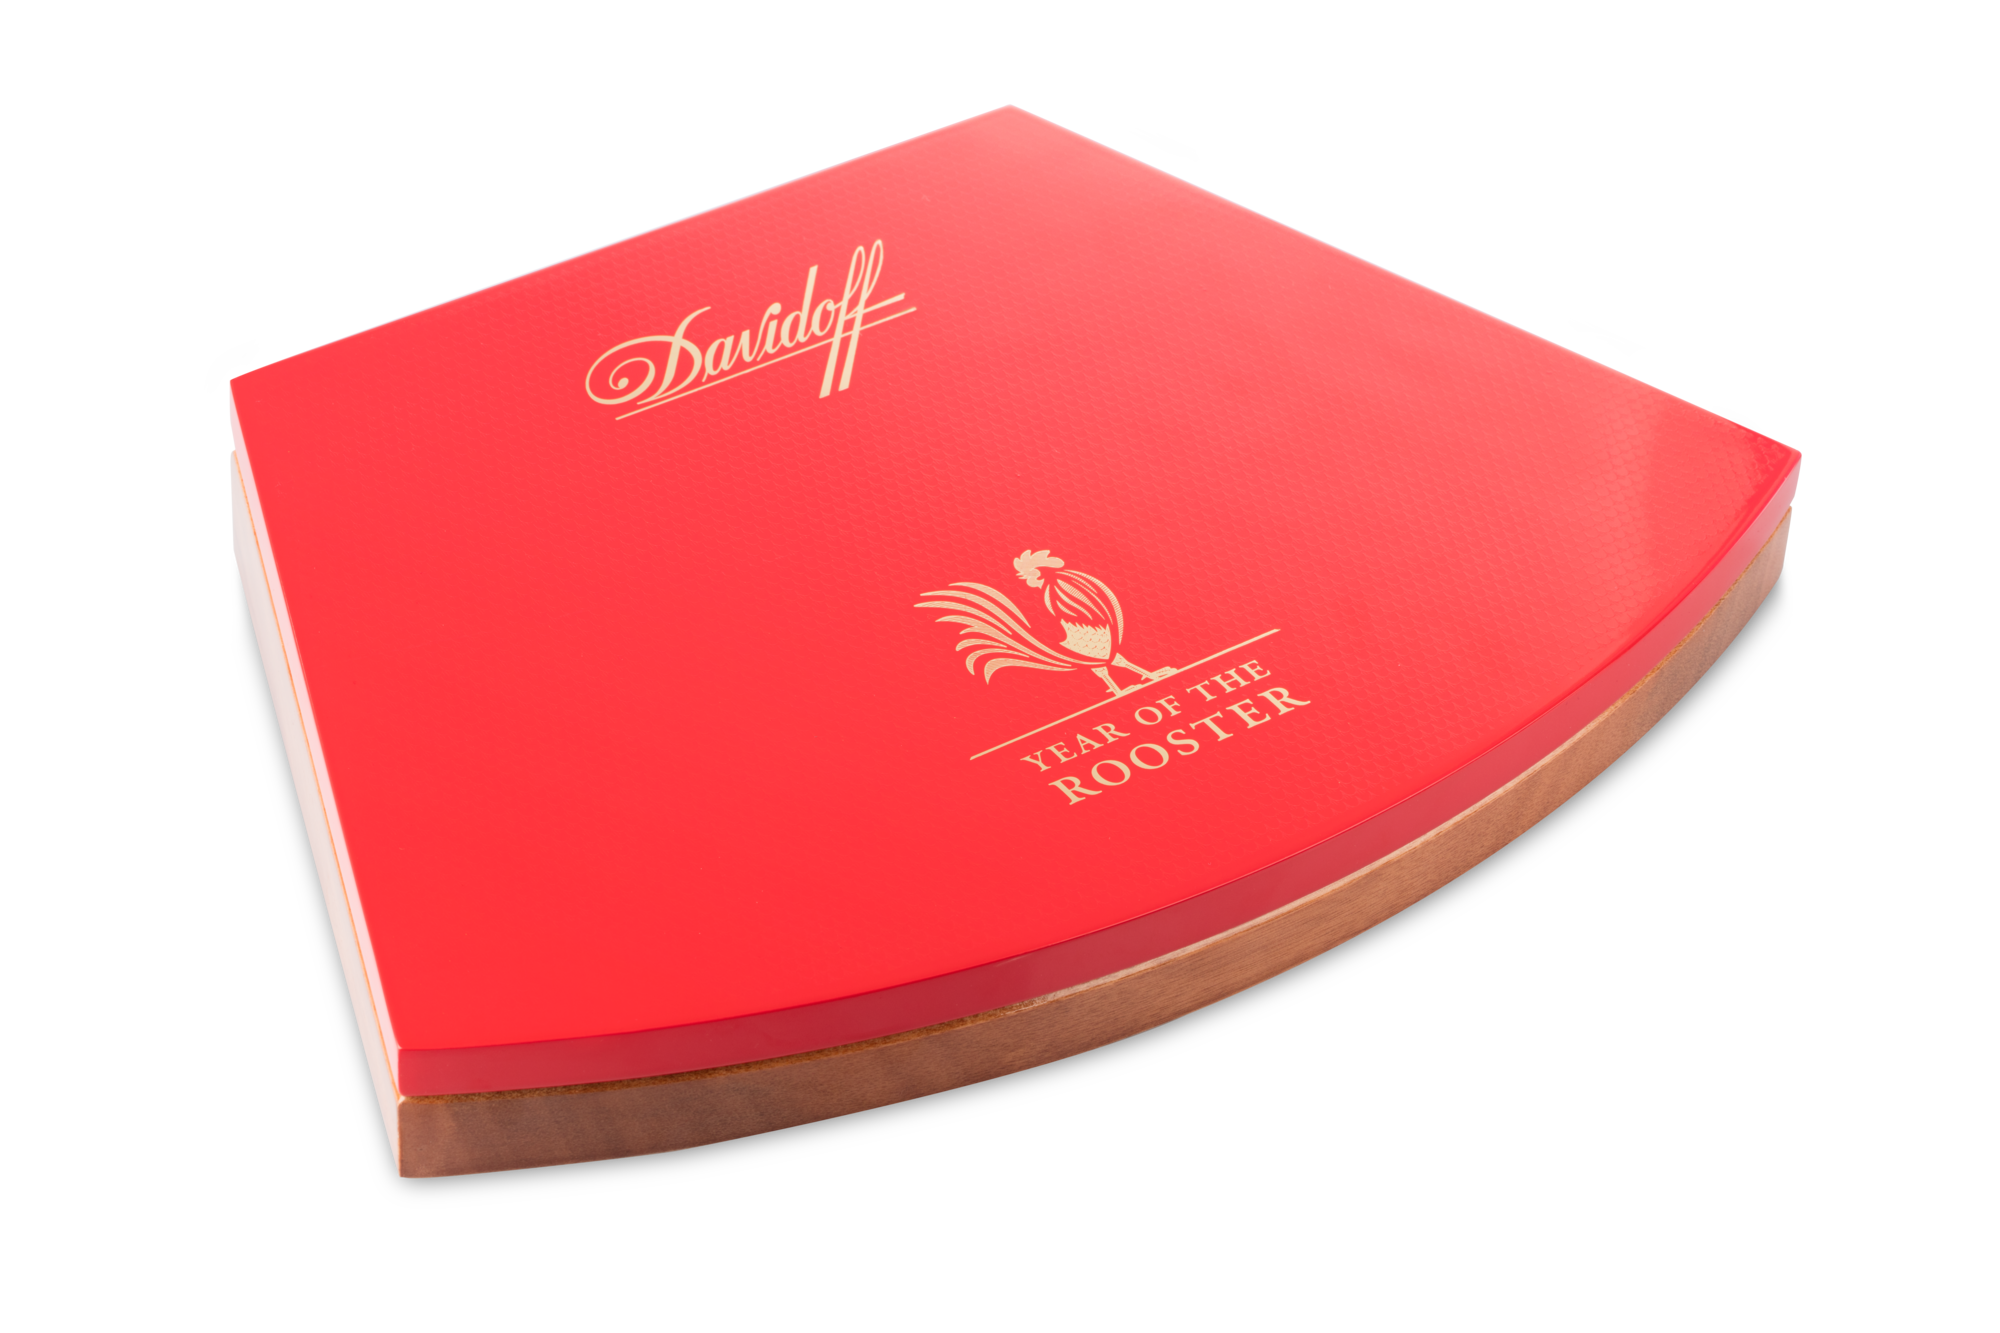 davidoff_year_of_the_rooster_limited_edition_2017_box